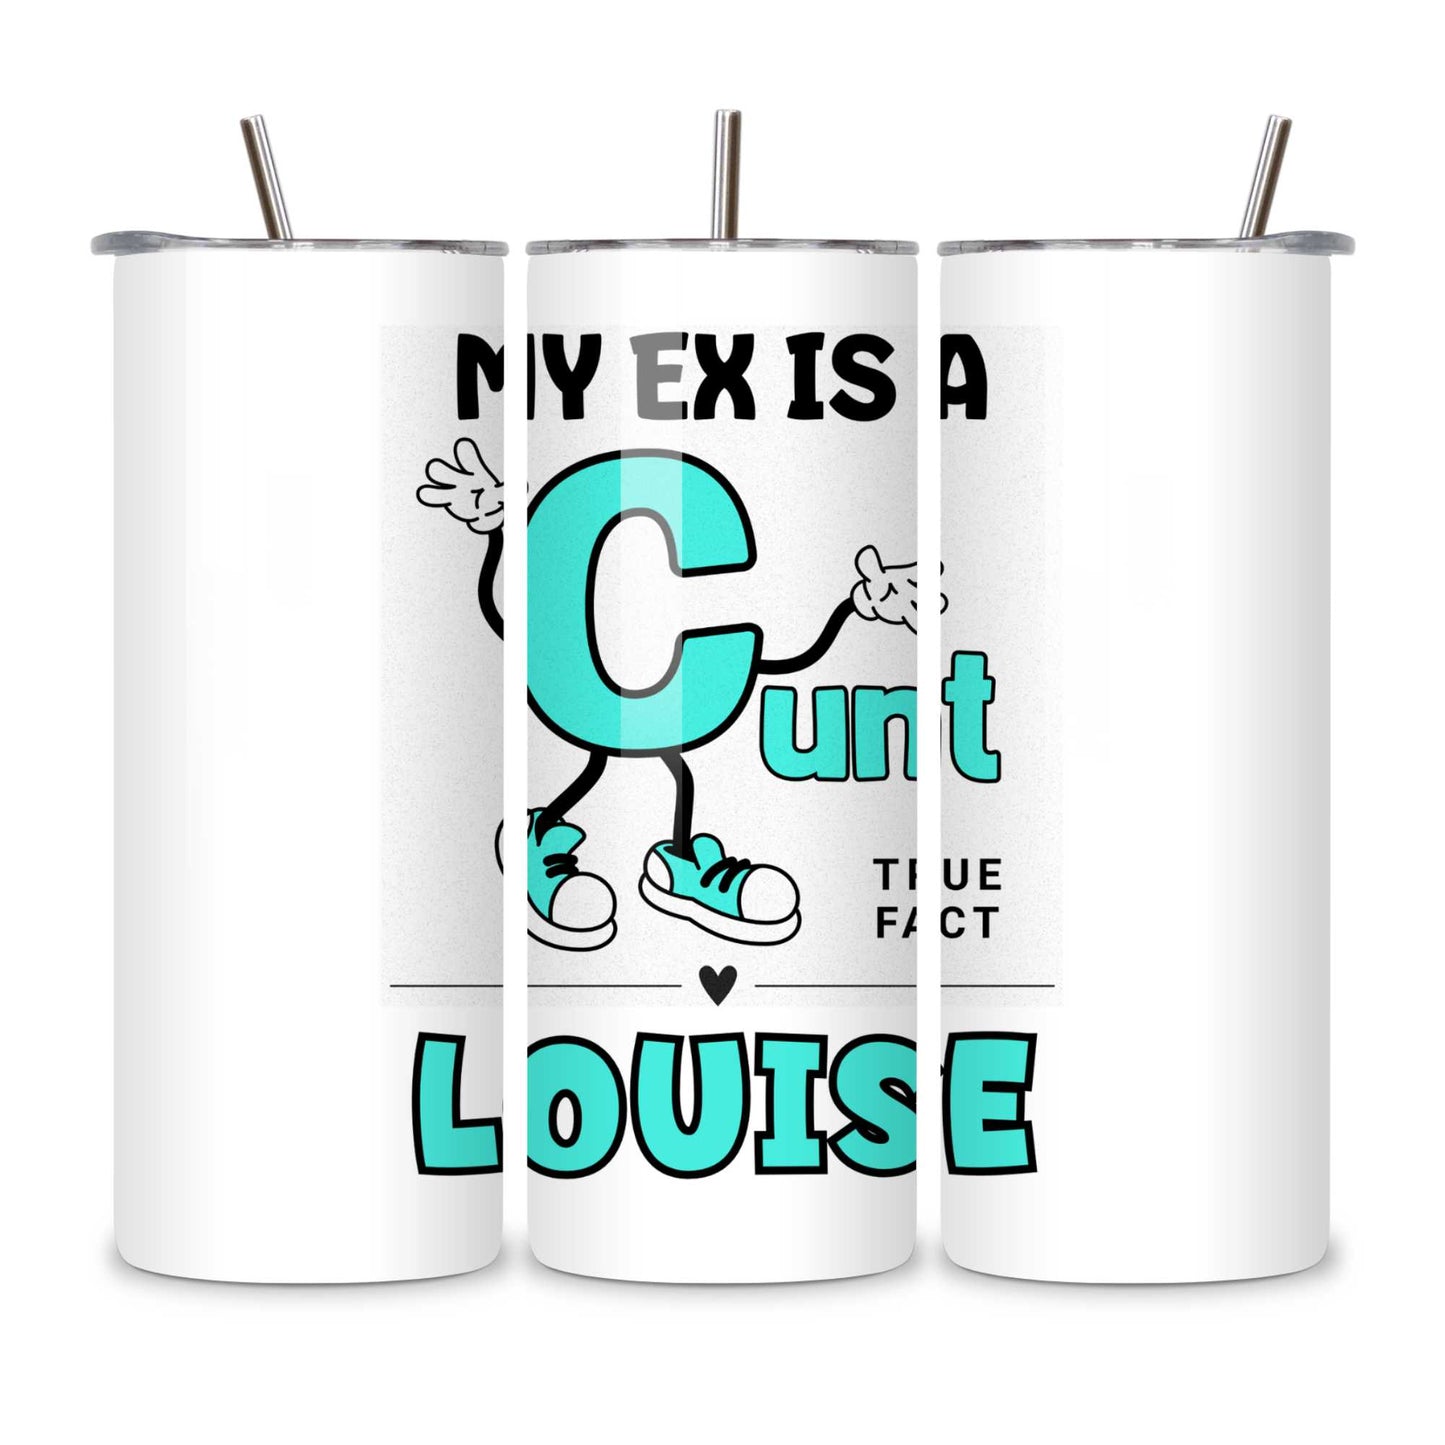 My Ex is a Cunt Mug - Hilarious Naughty Rude Mug for a Good Laugh or Gift